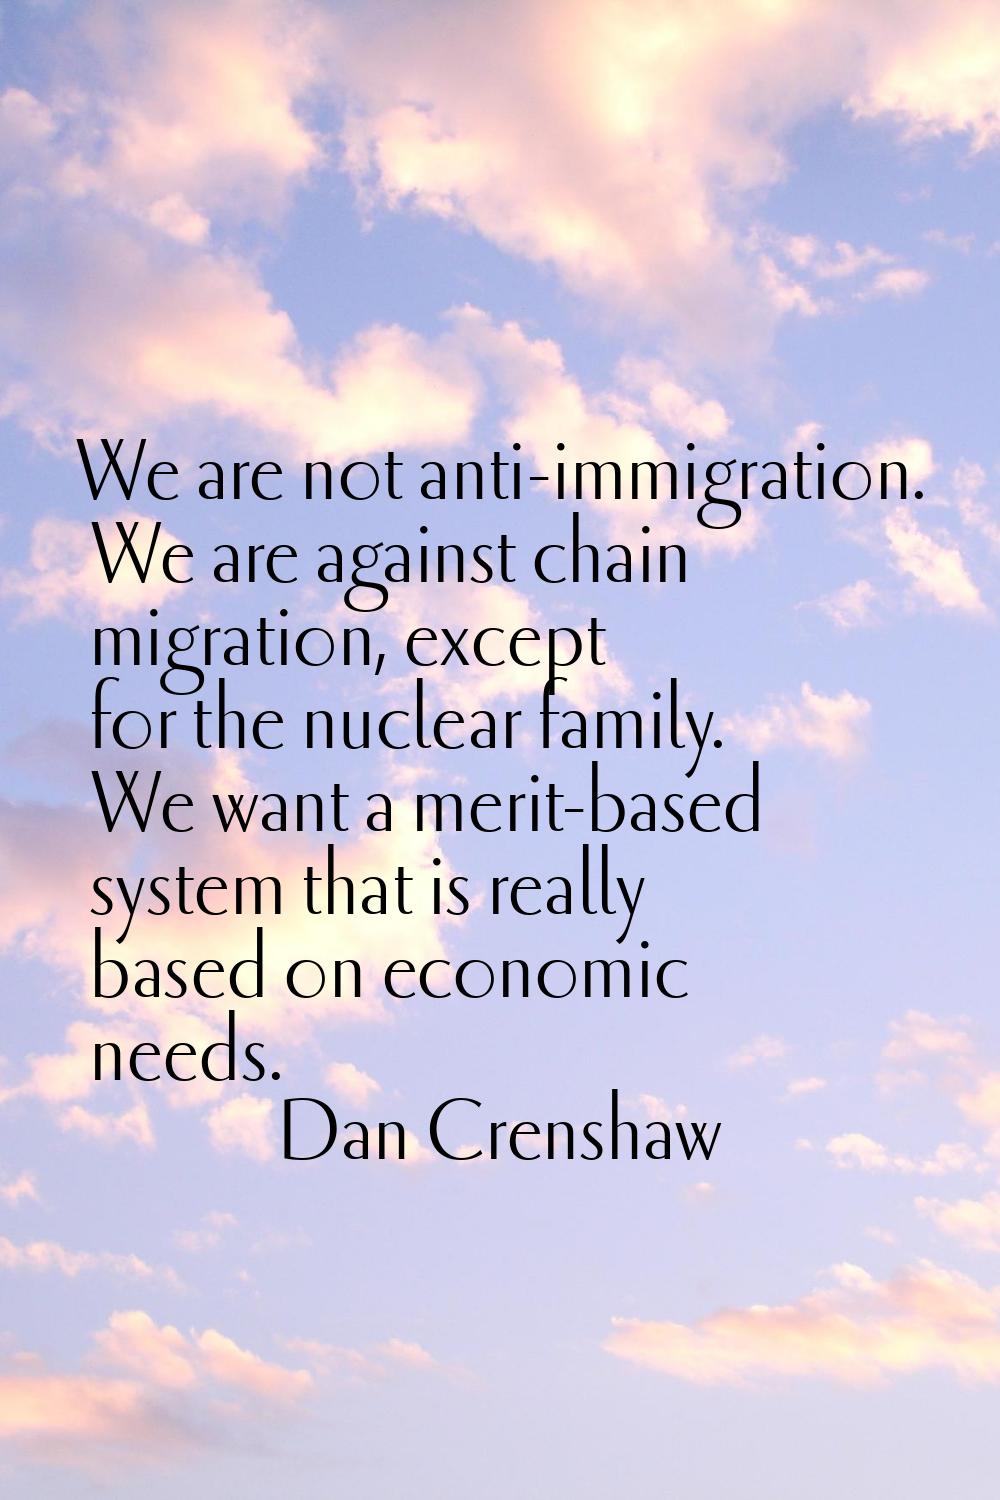 We are not anti-immigration. We are against chain migration, except for the nuclear family. We want